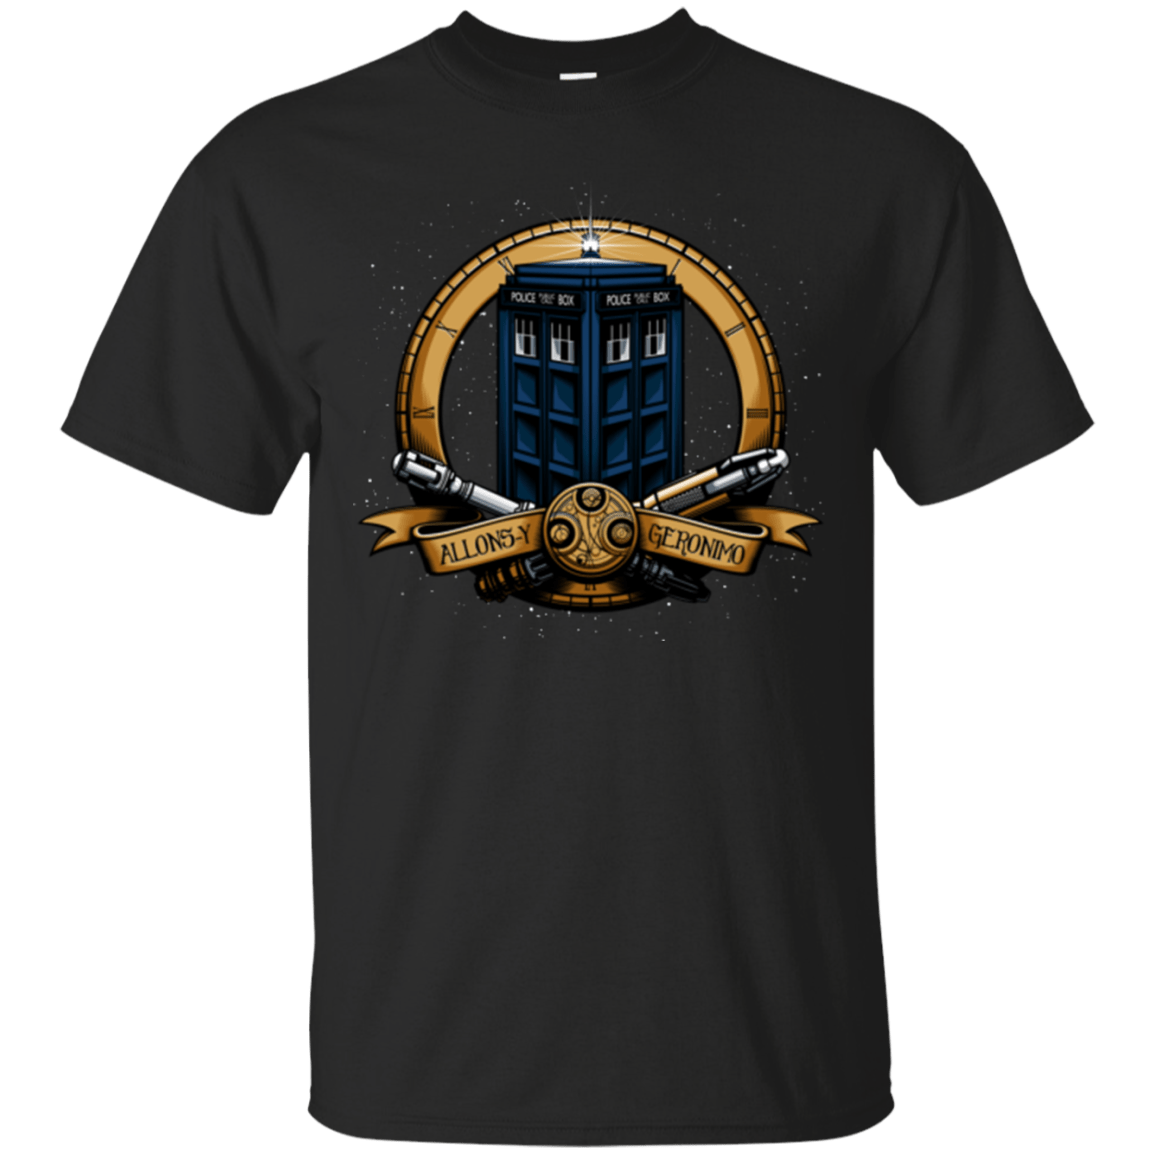 T-Shirts Black / Small The Day of the Doctor T-Shirt